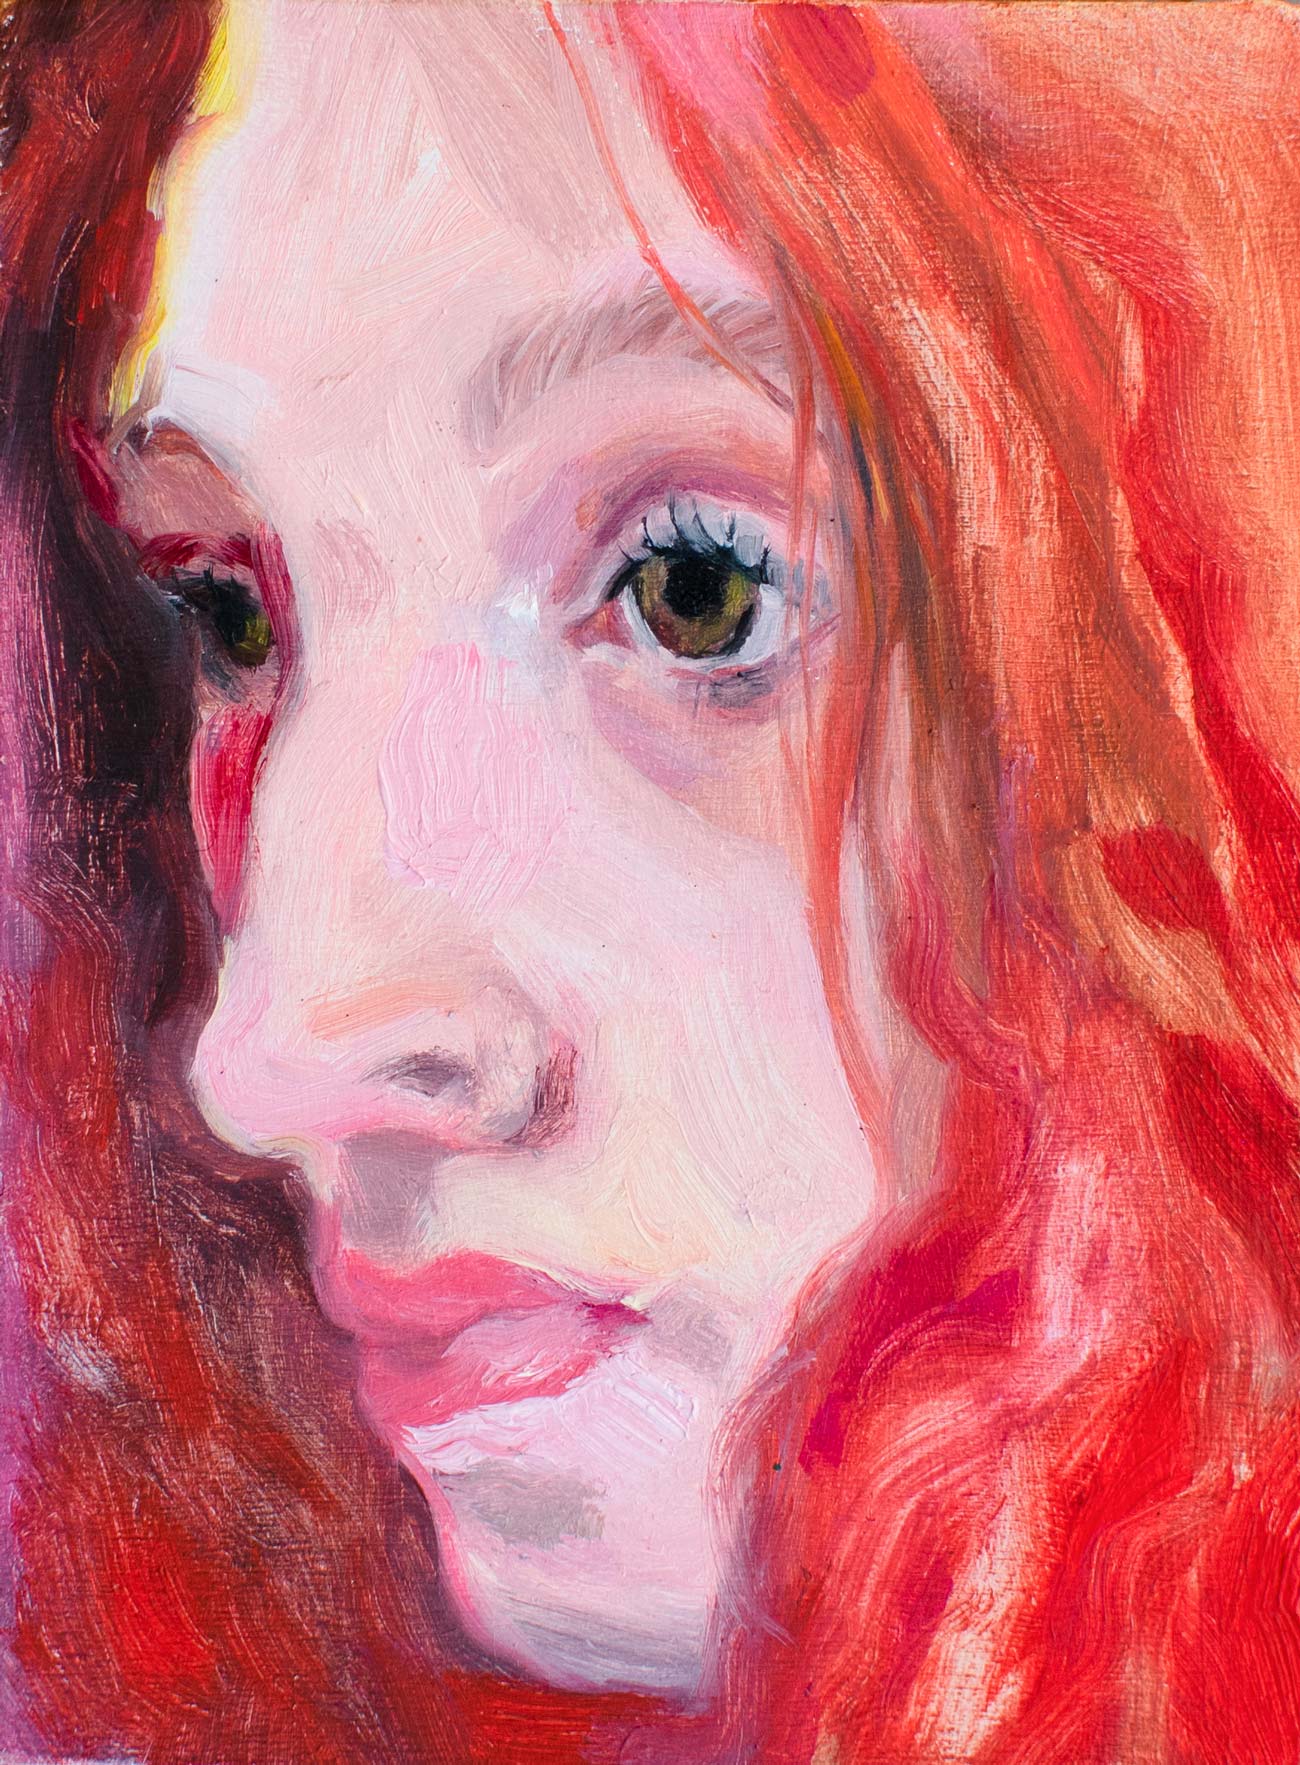 mostly red portrait of a young woman's face